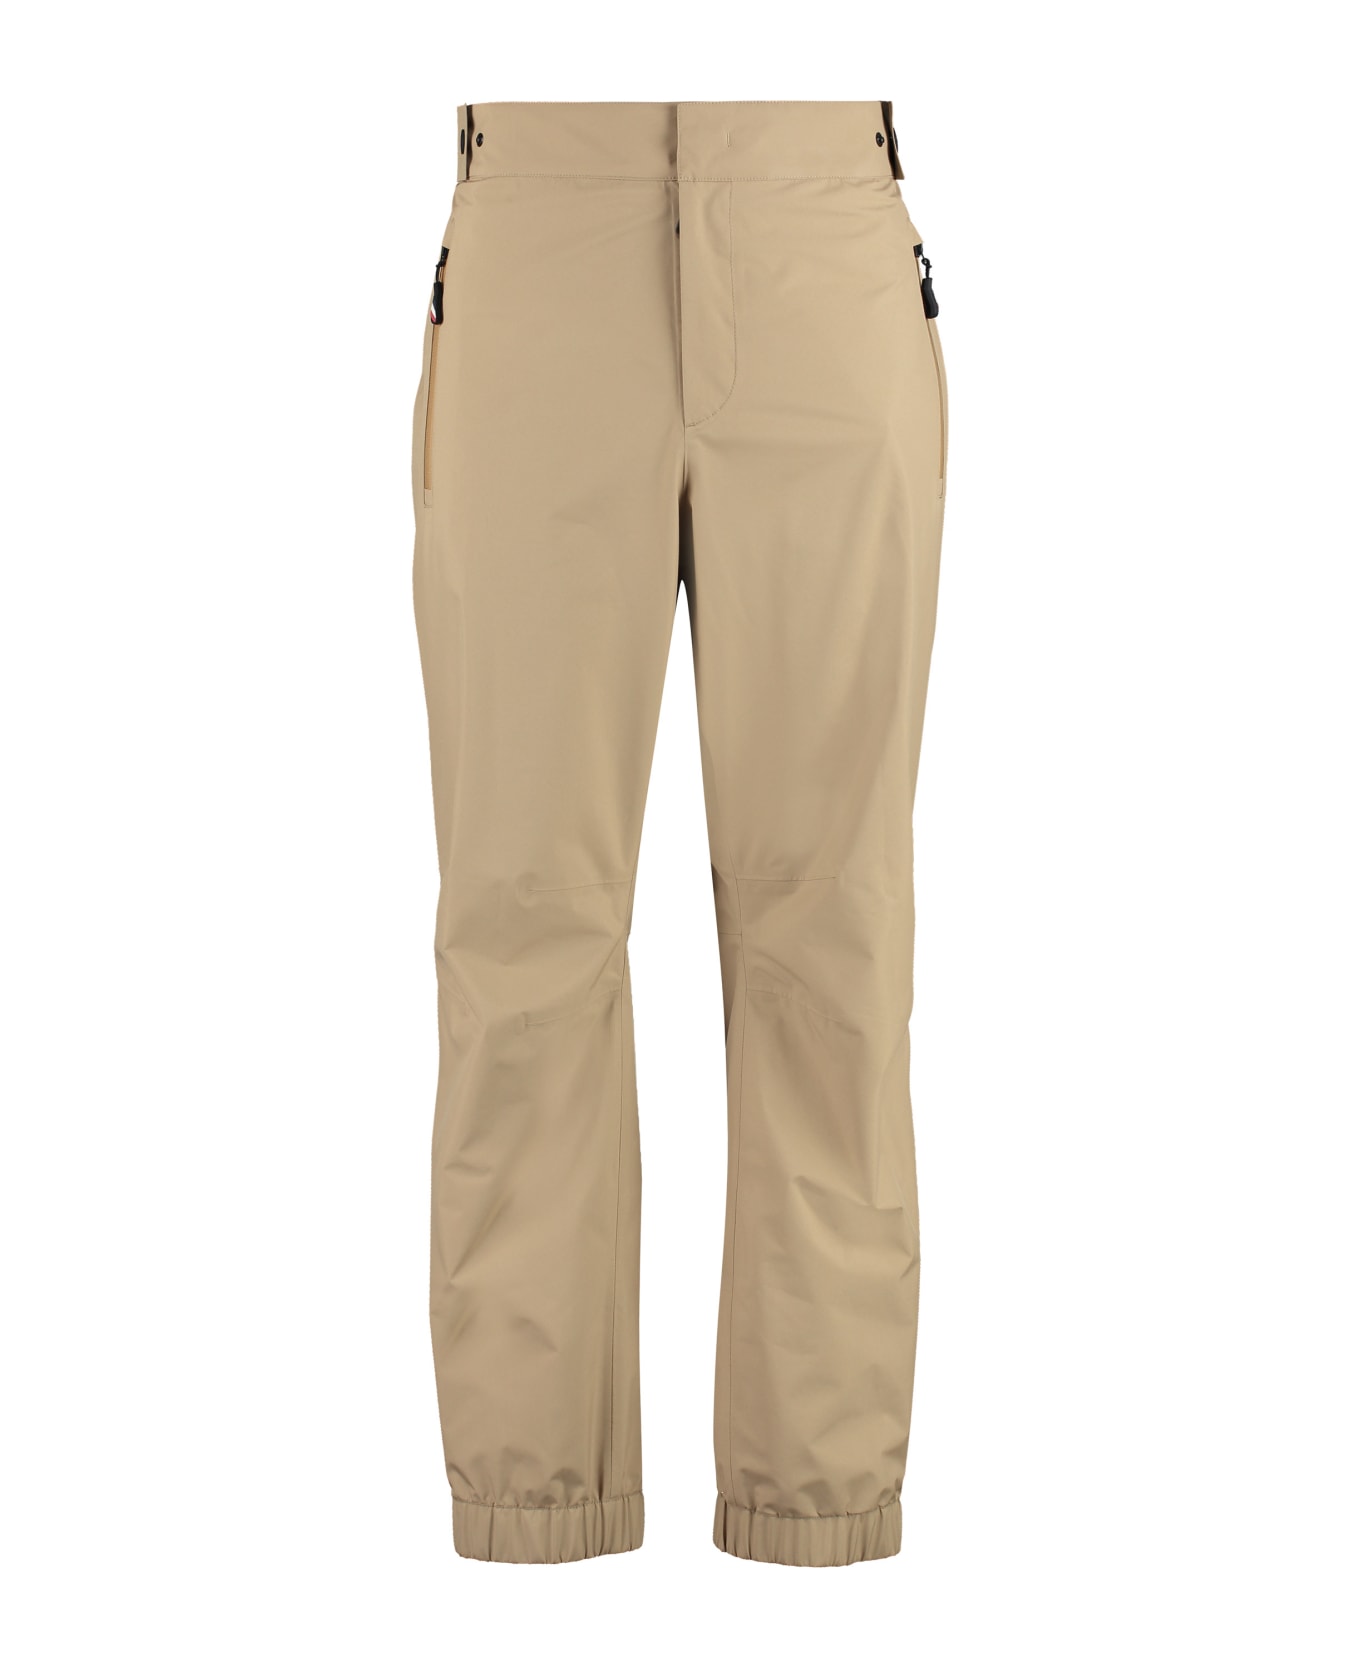 Moncler Grenoble Technical Fabric Pants - Beige ボトムス